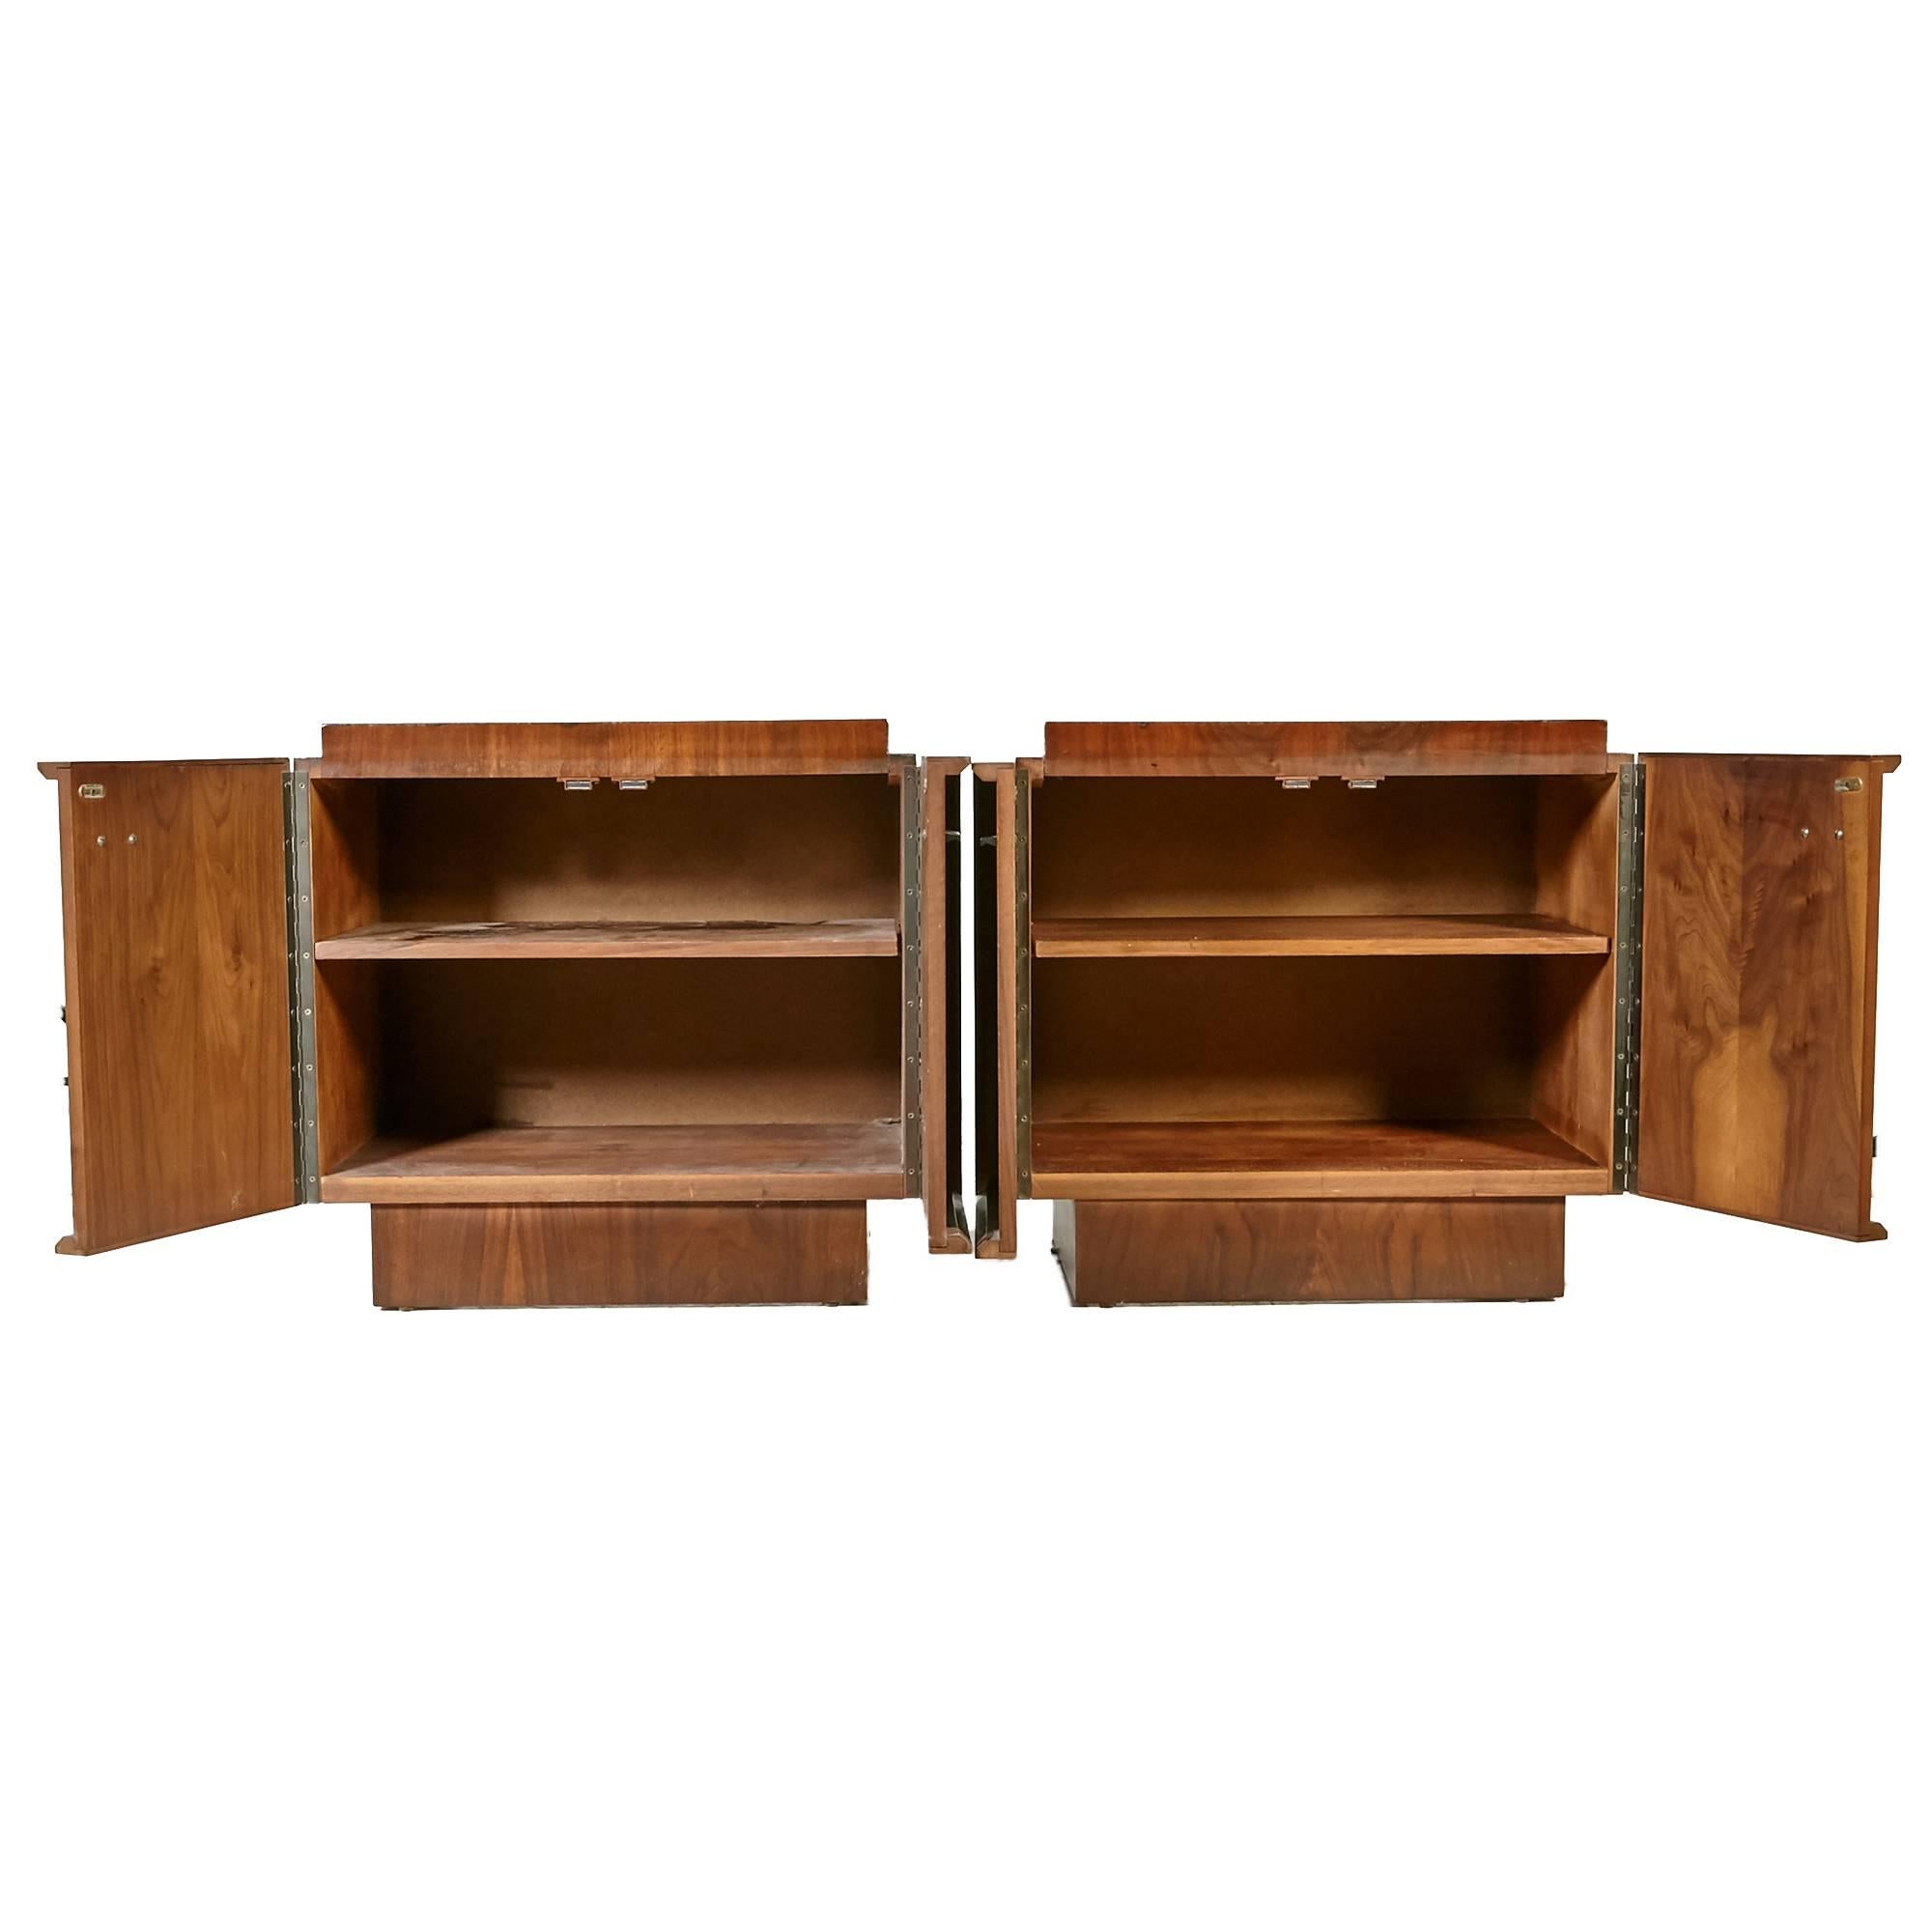 1960s pair of walnut wood Brutalist style nightstands with black metal pulls. Interior shelf for storage. Unmarked.